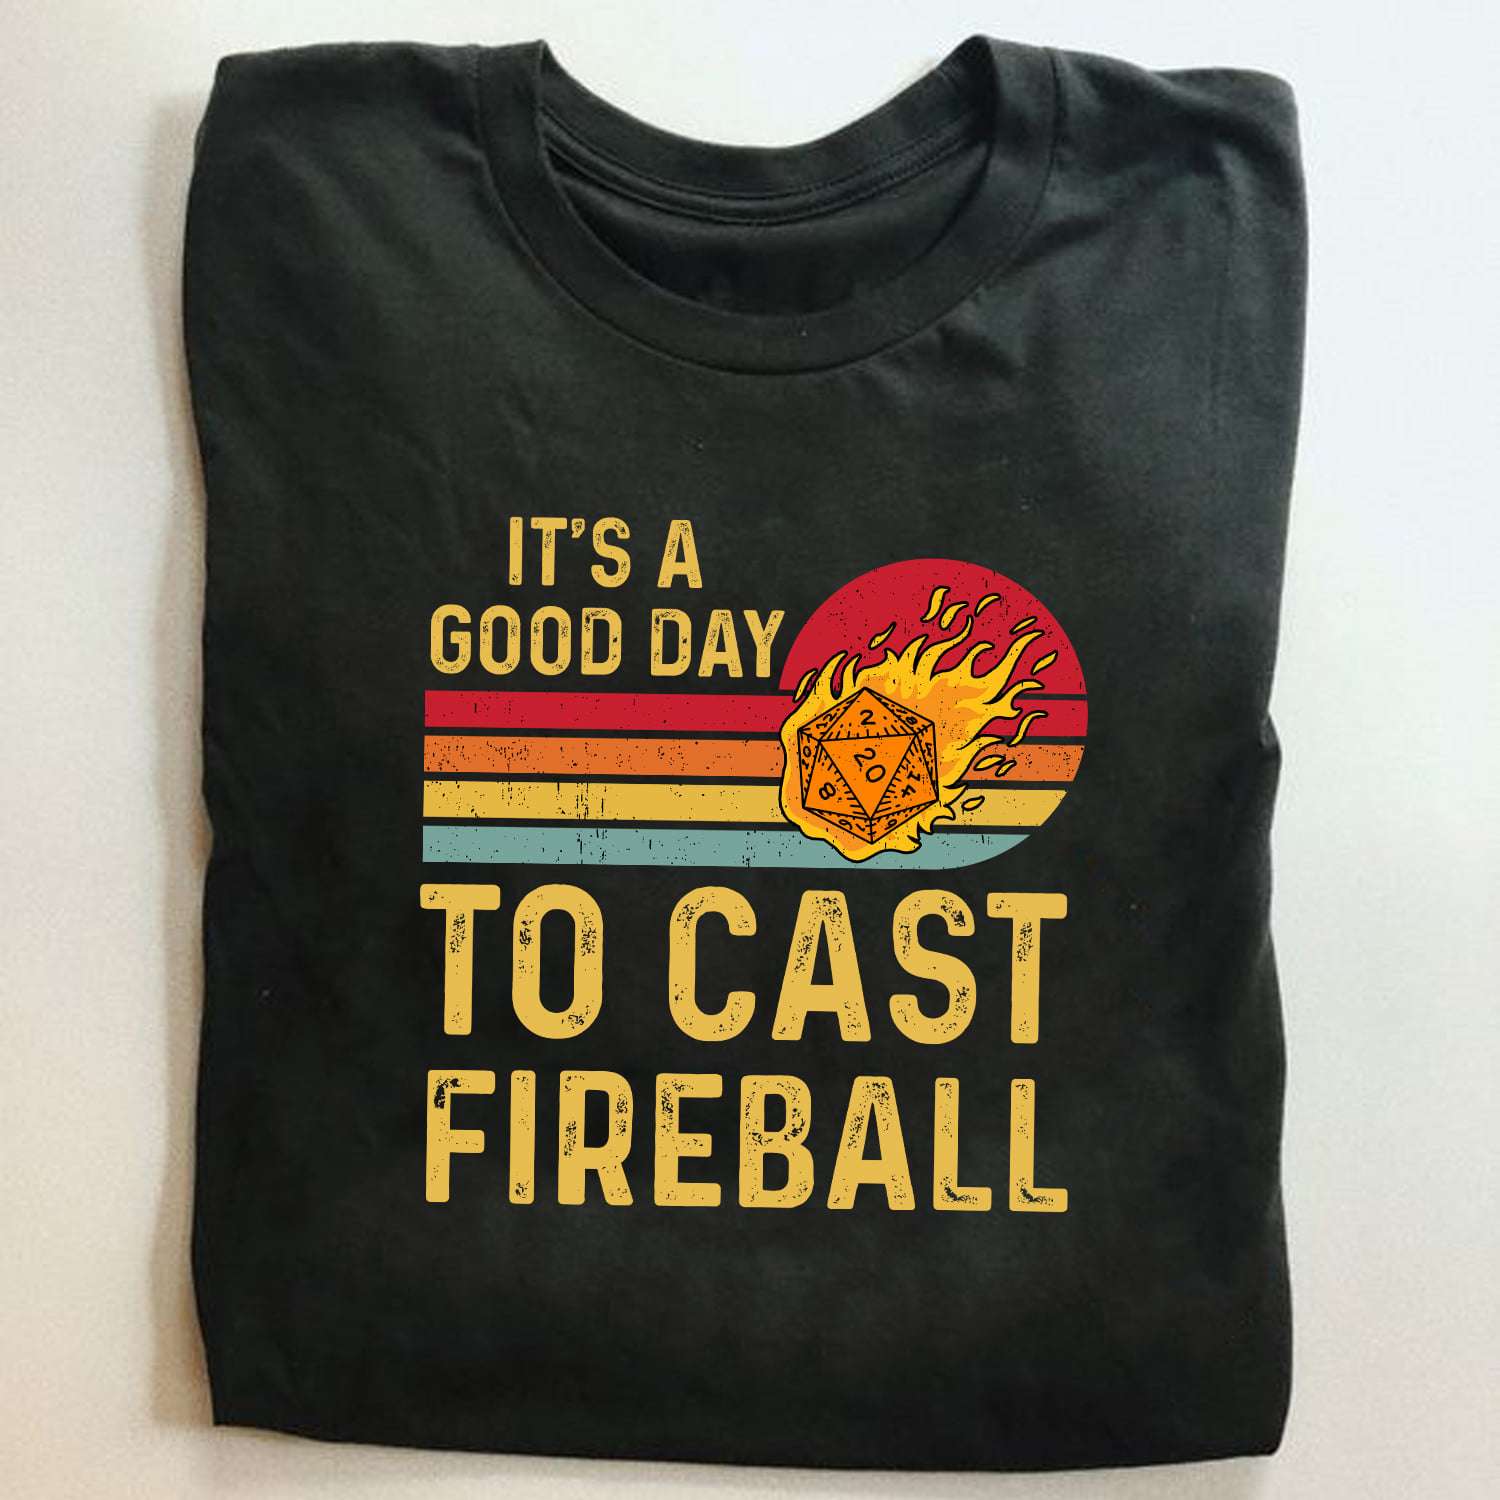 It's a good day to cast fireball - D&d game, Game of Thrones